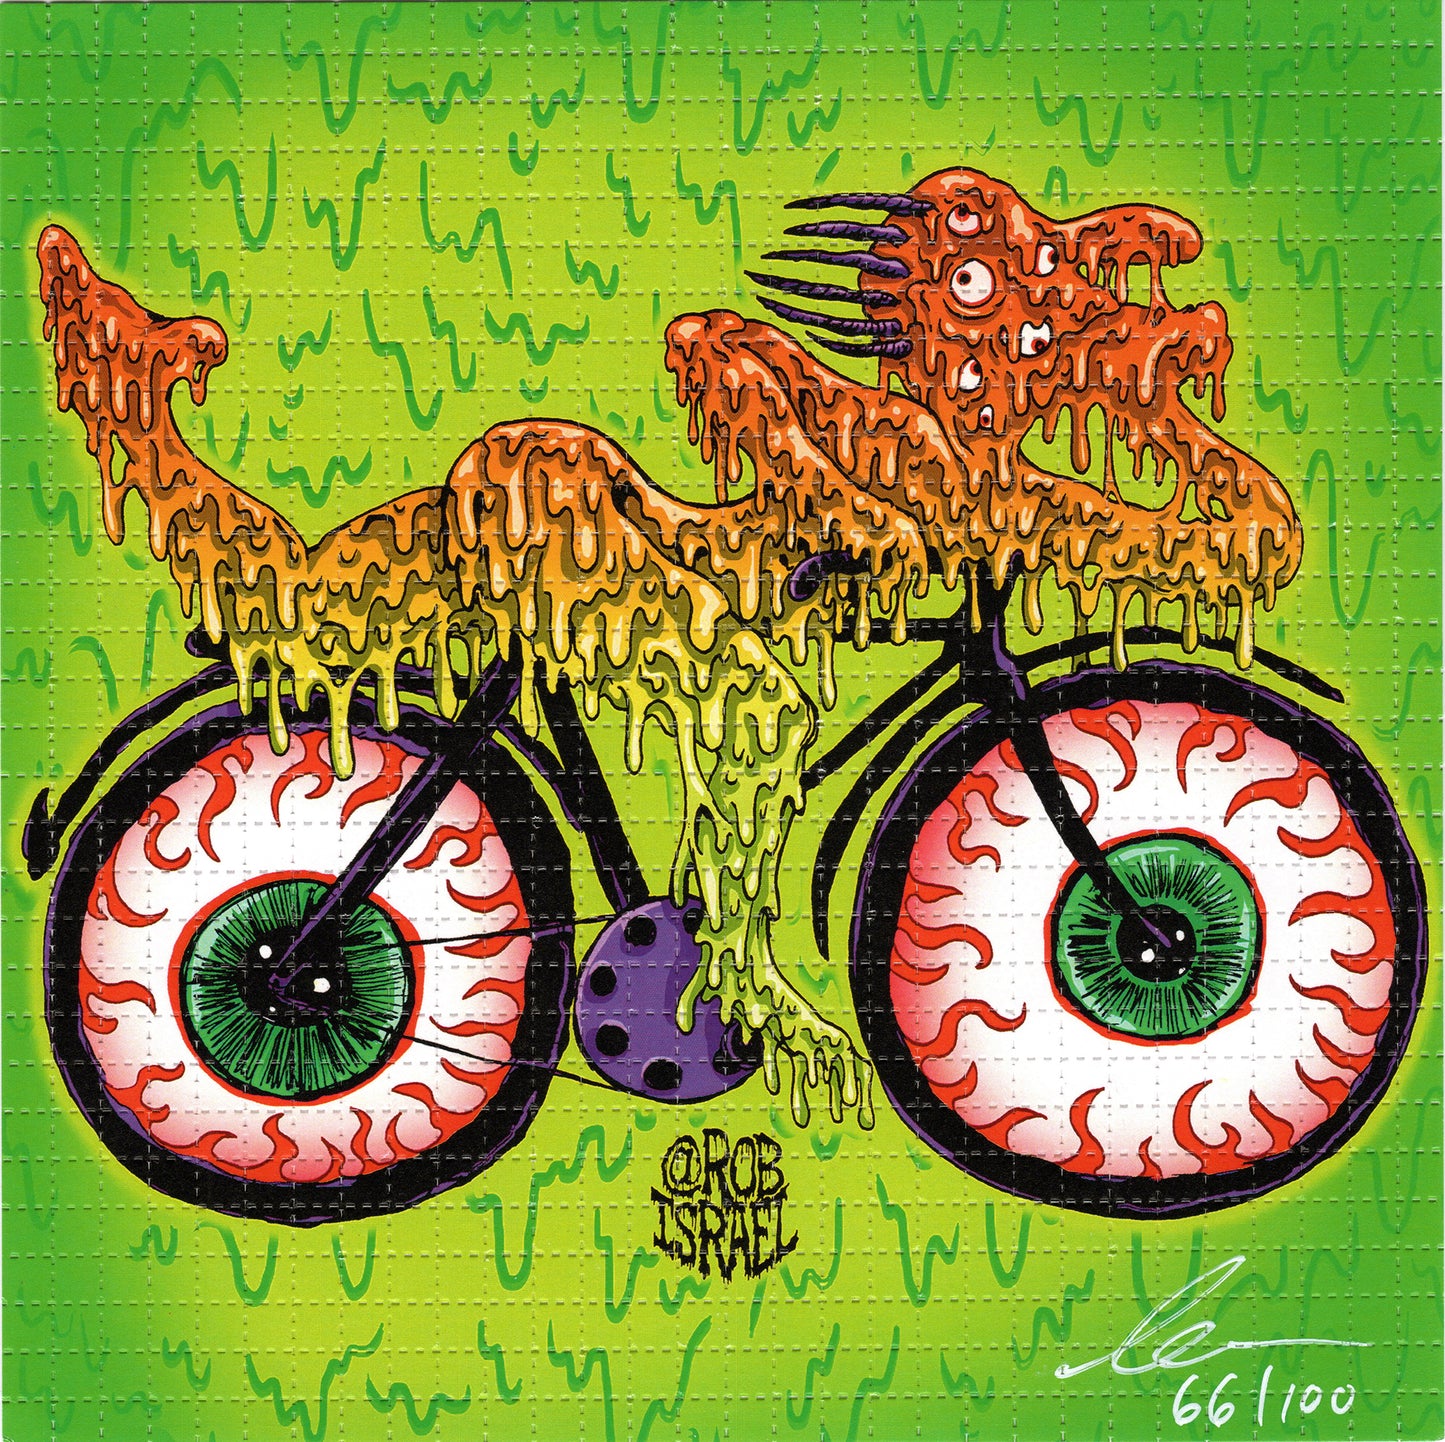 Melting Bicycle Day by Rob Israel SIGNED Limited Edition LSD blotter art print